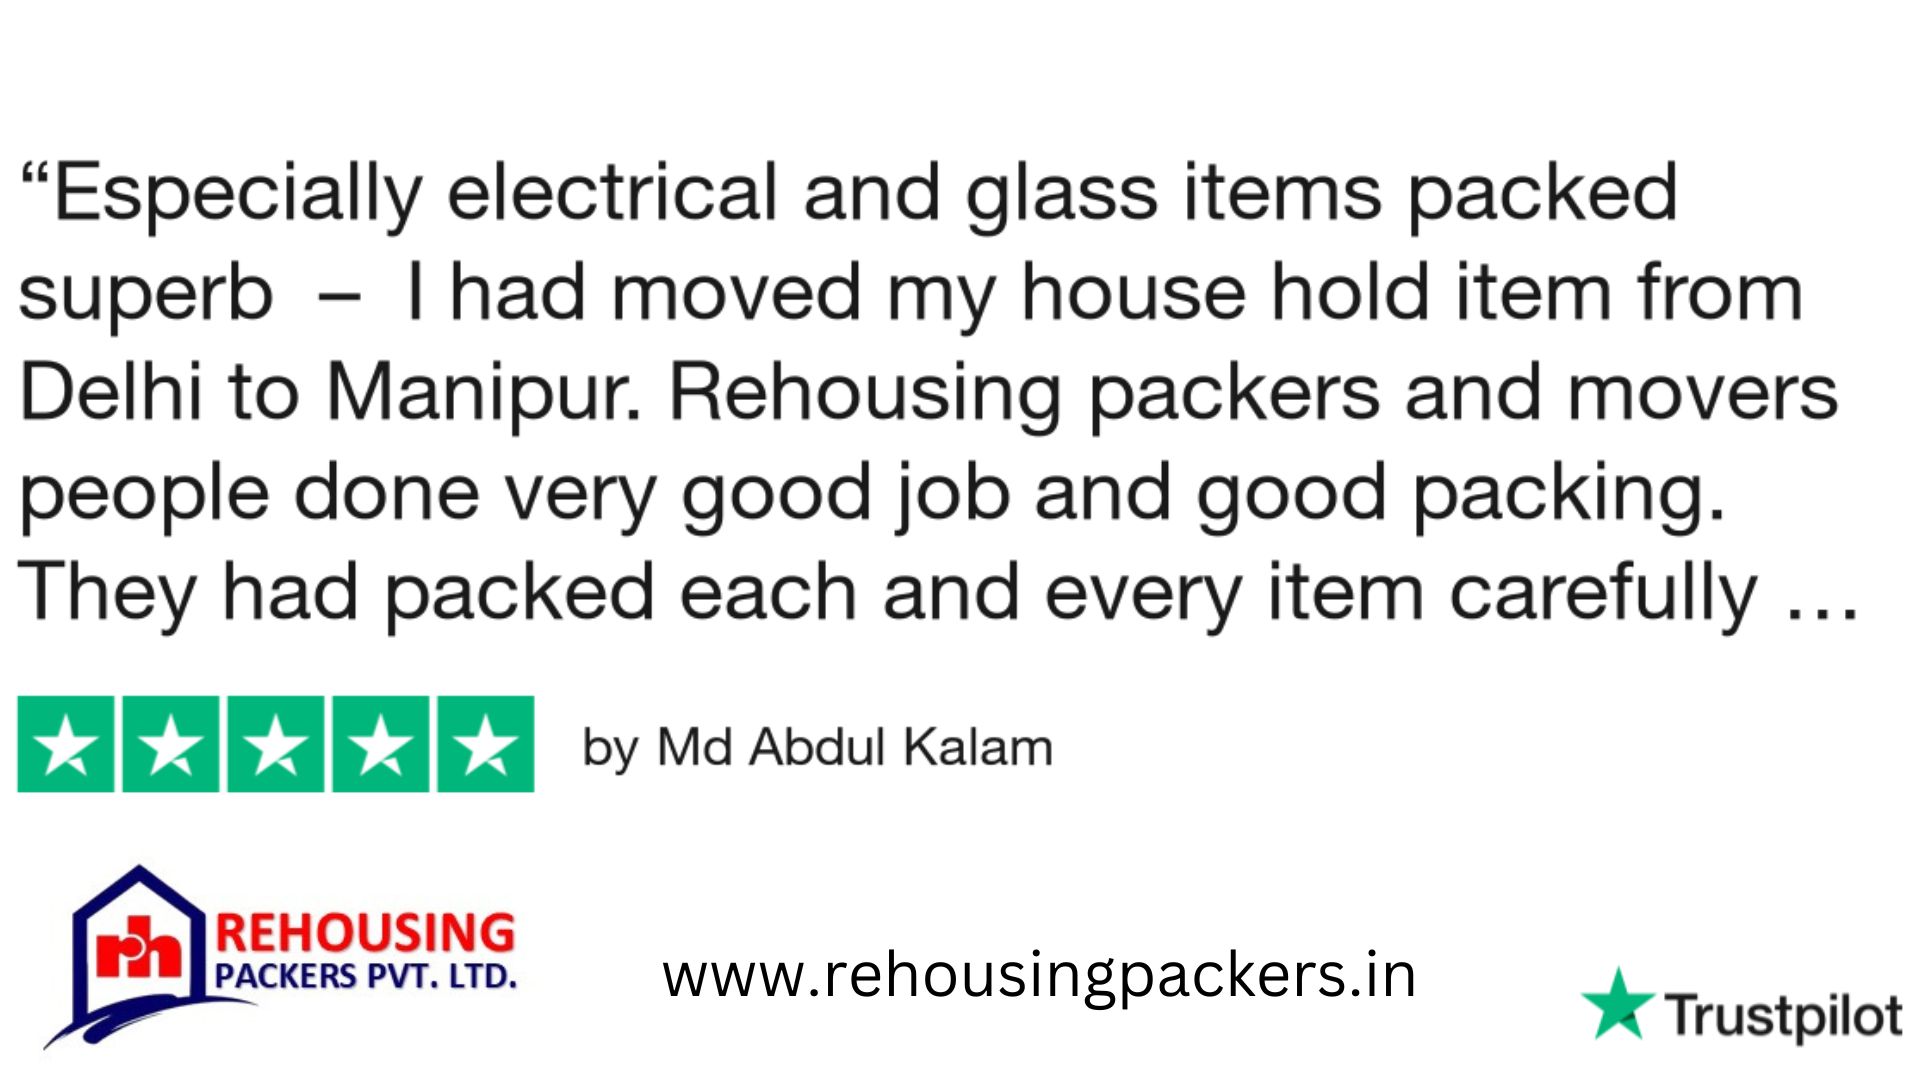 Rehousing packers and movers reviews trustpilot 2